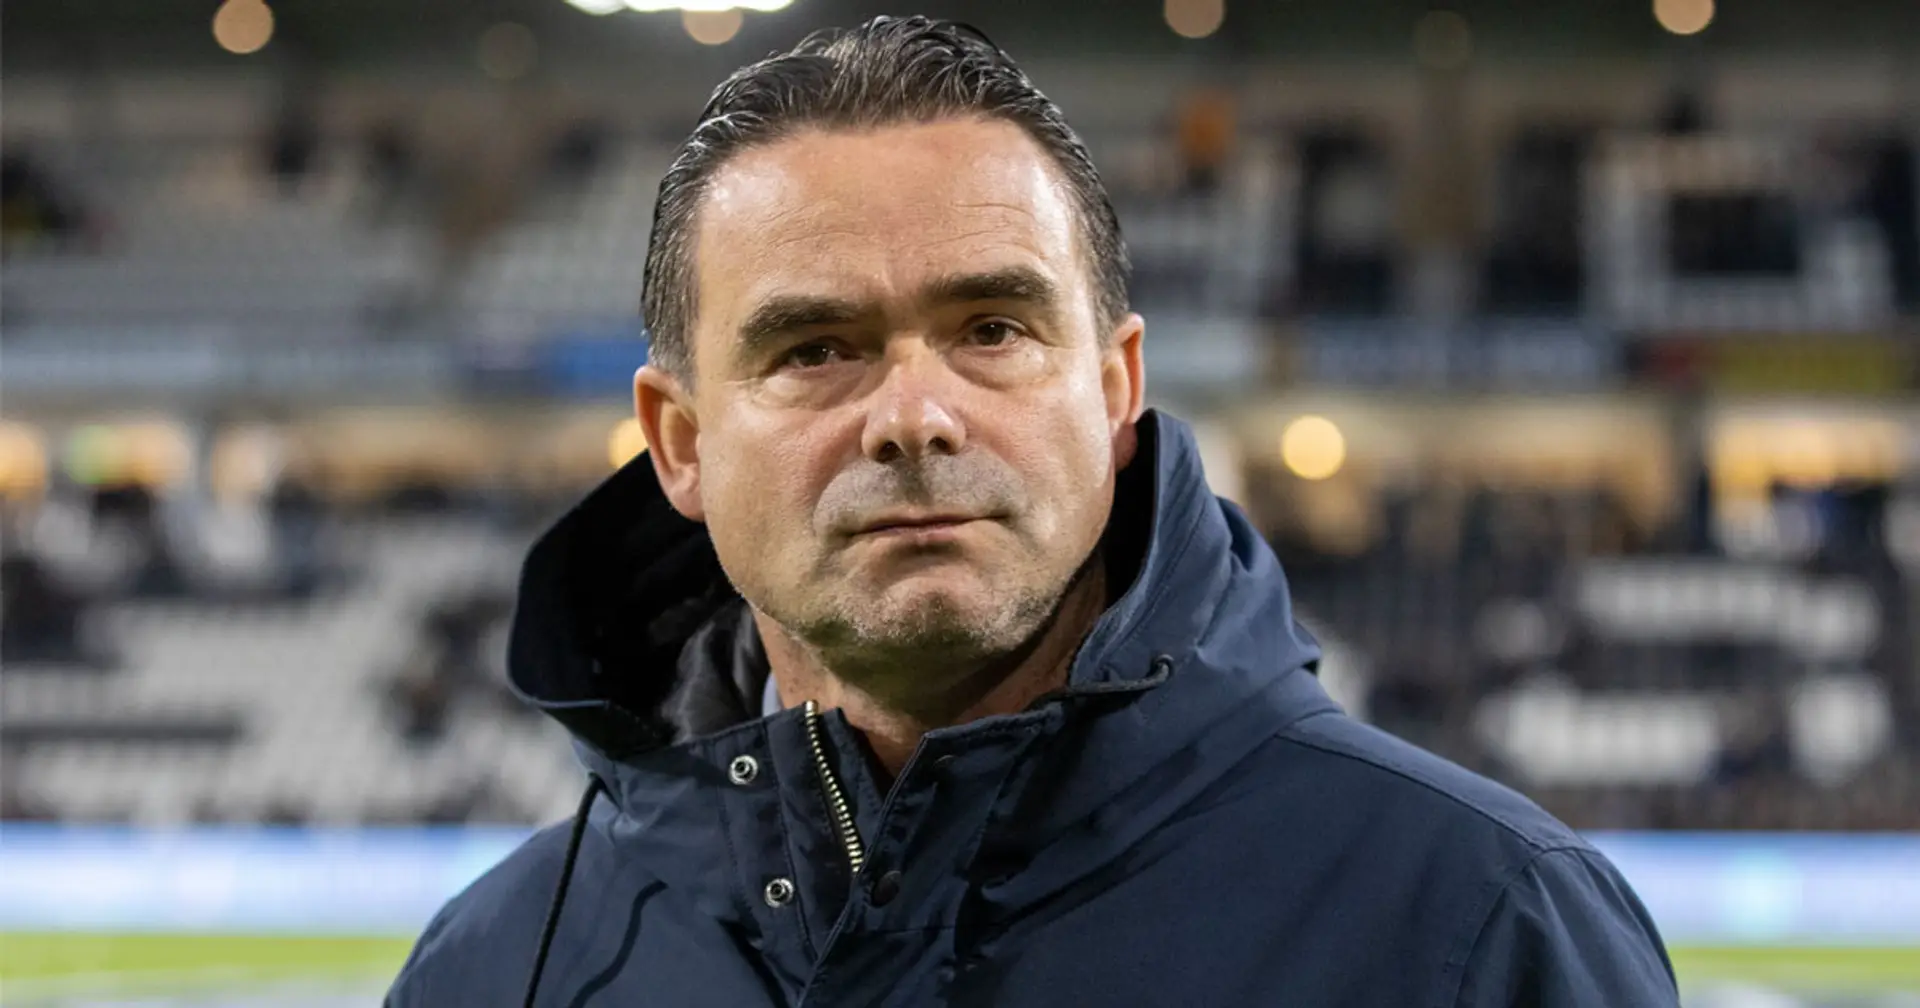 Marc Overmars told to pay back contract renewal bonus received from Ajax before quitting